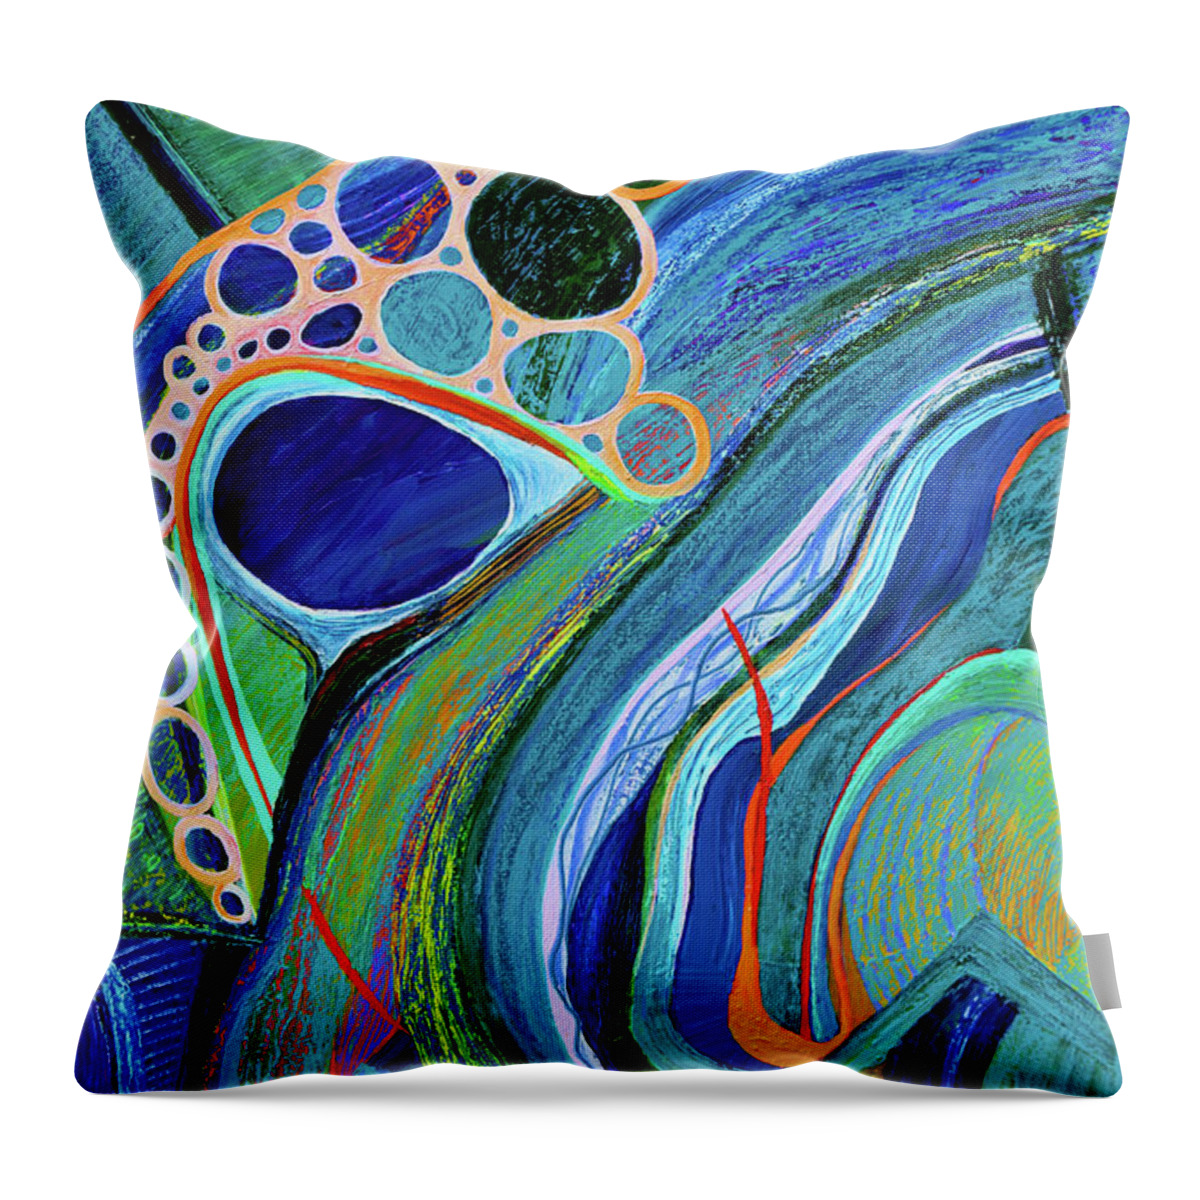  Throw Pillow featuring the painting Serendipity by Polly Castor